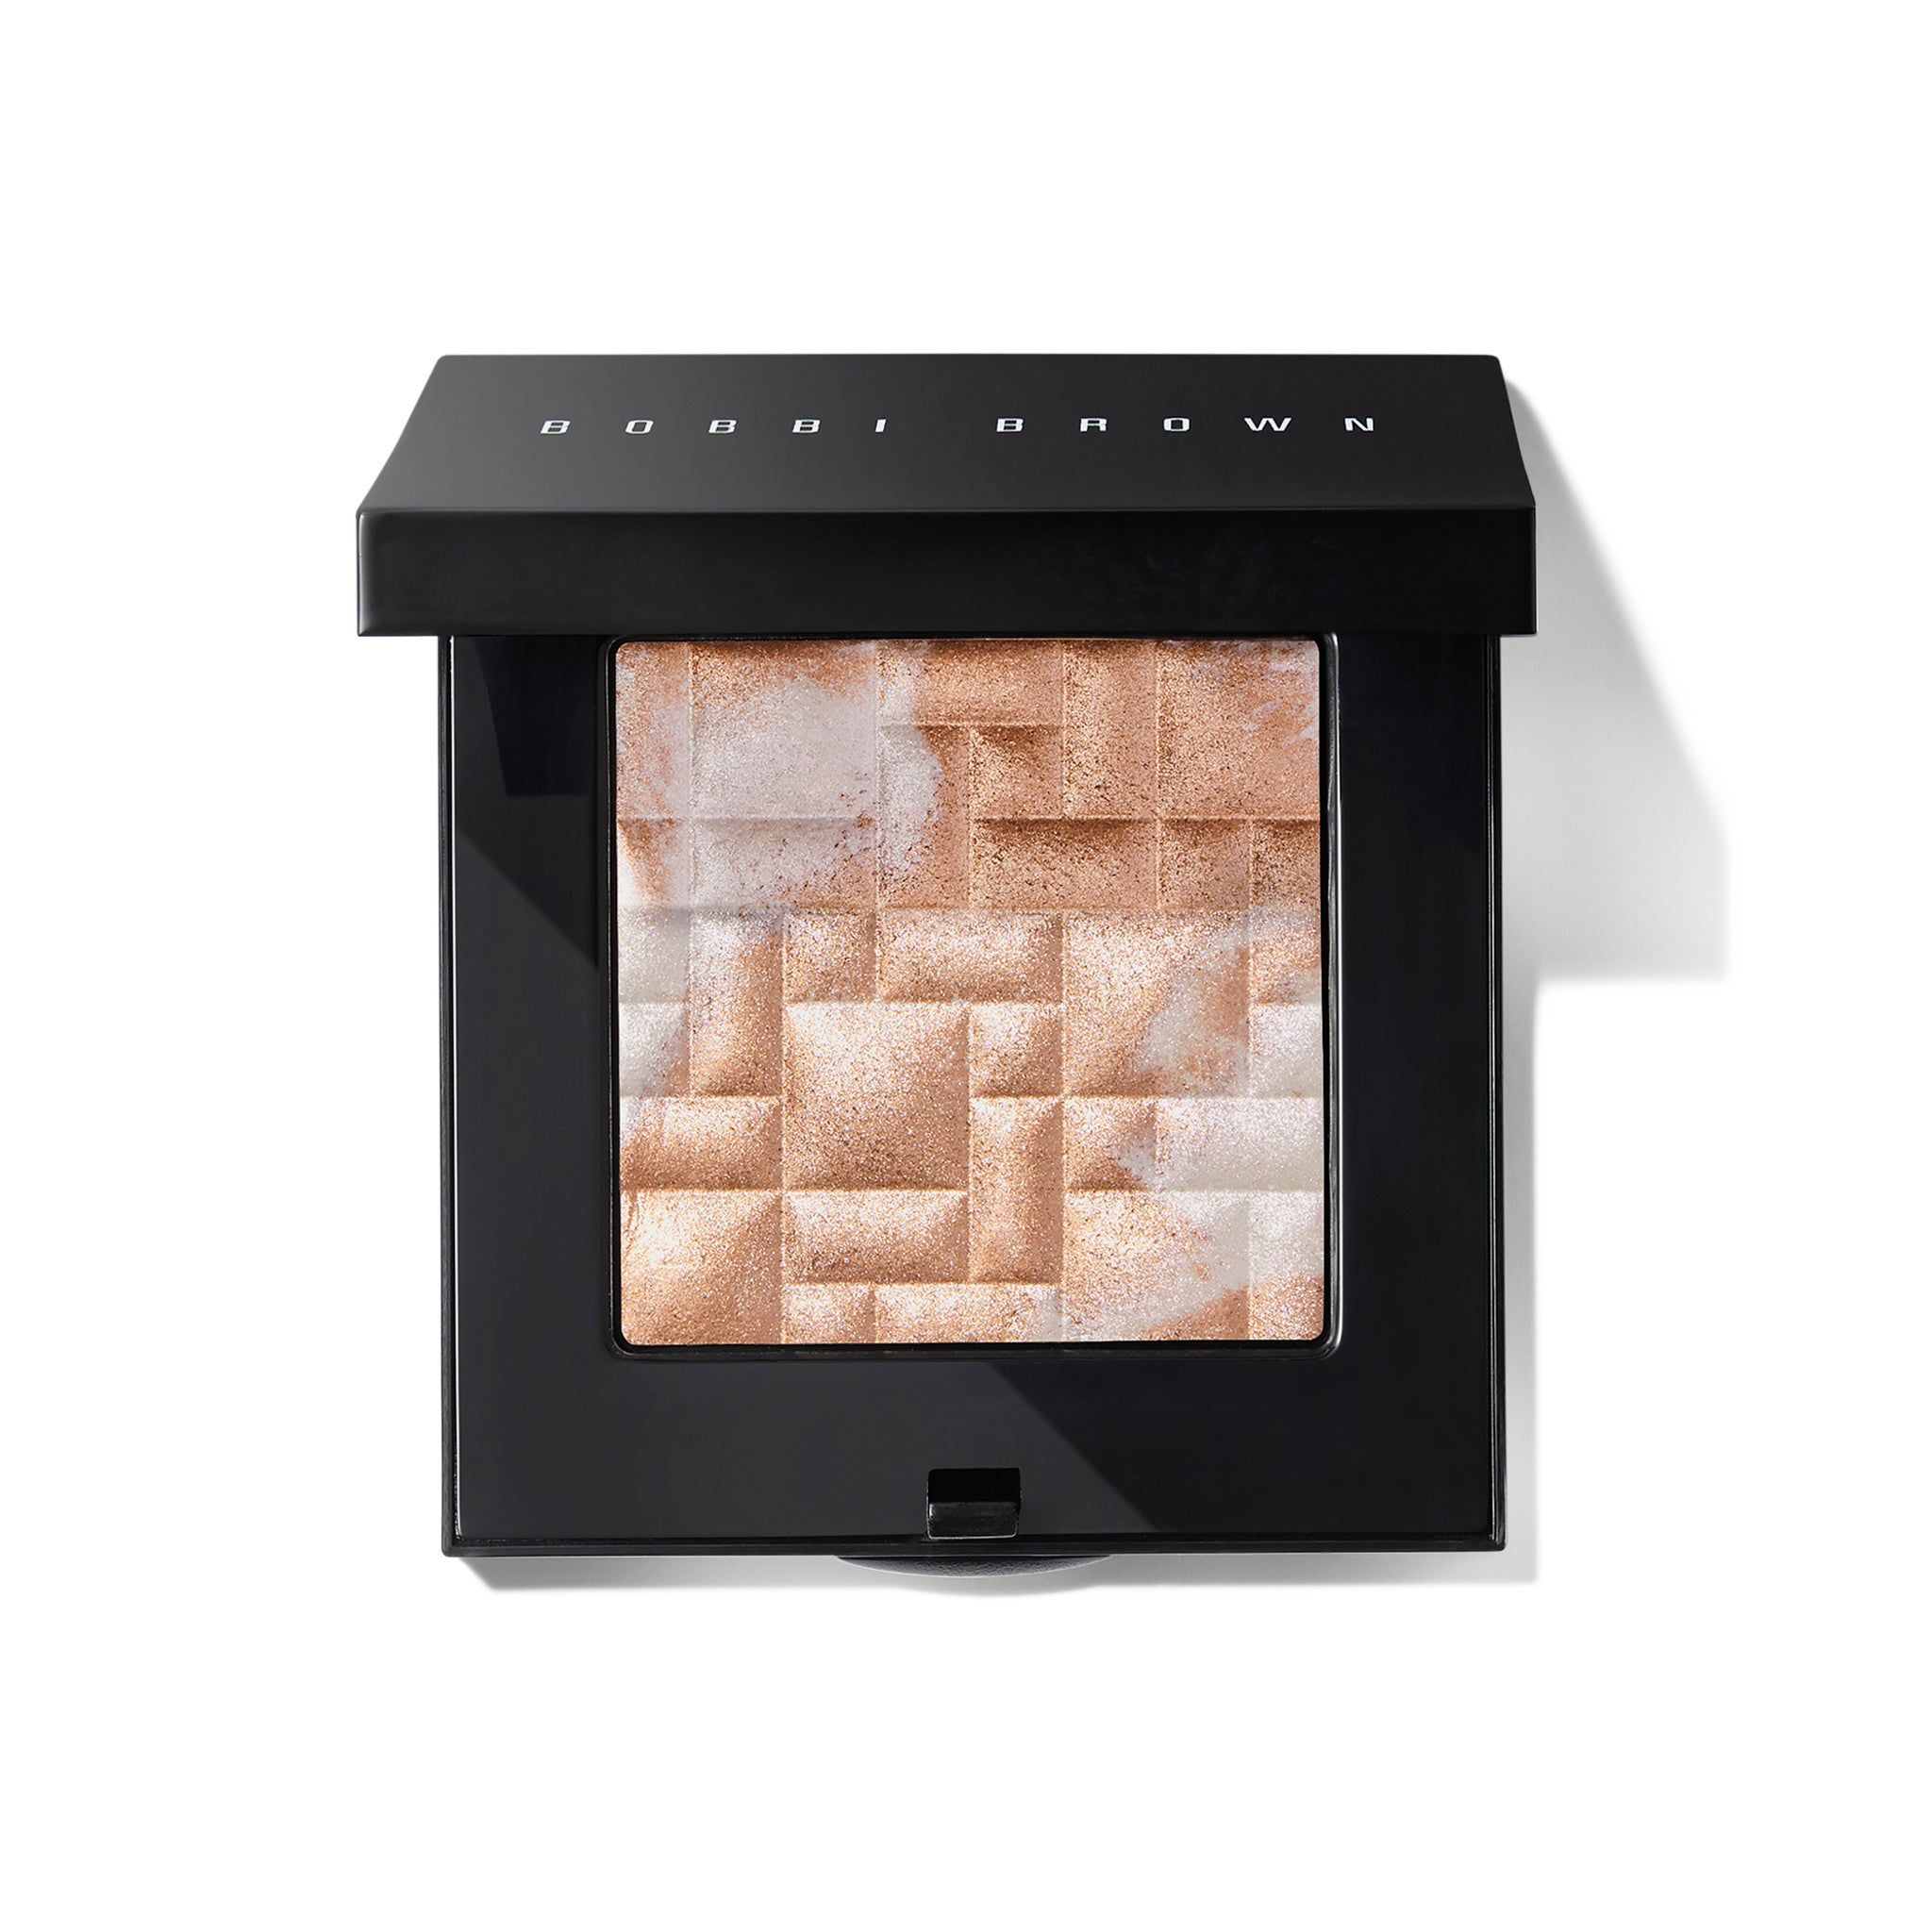 Bobbi Brown Highlighting Powder Color/Shade variant: Peach Glow main image. This product is in the color pink